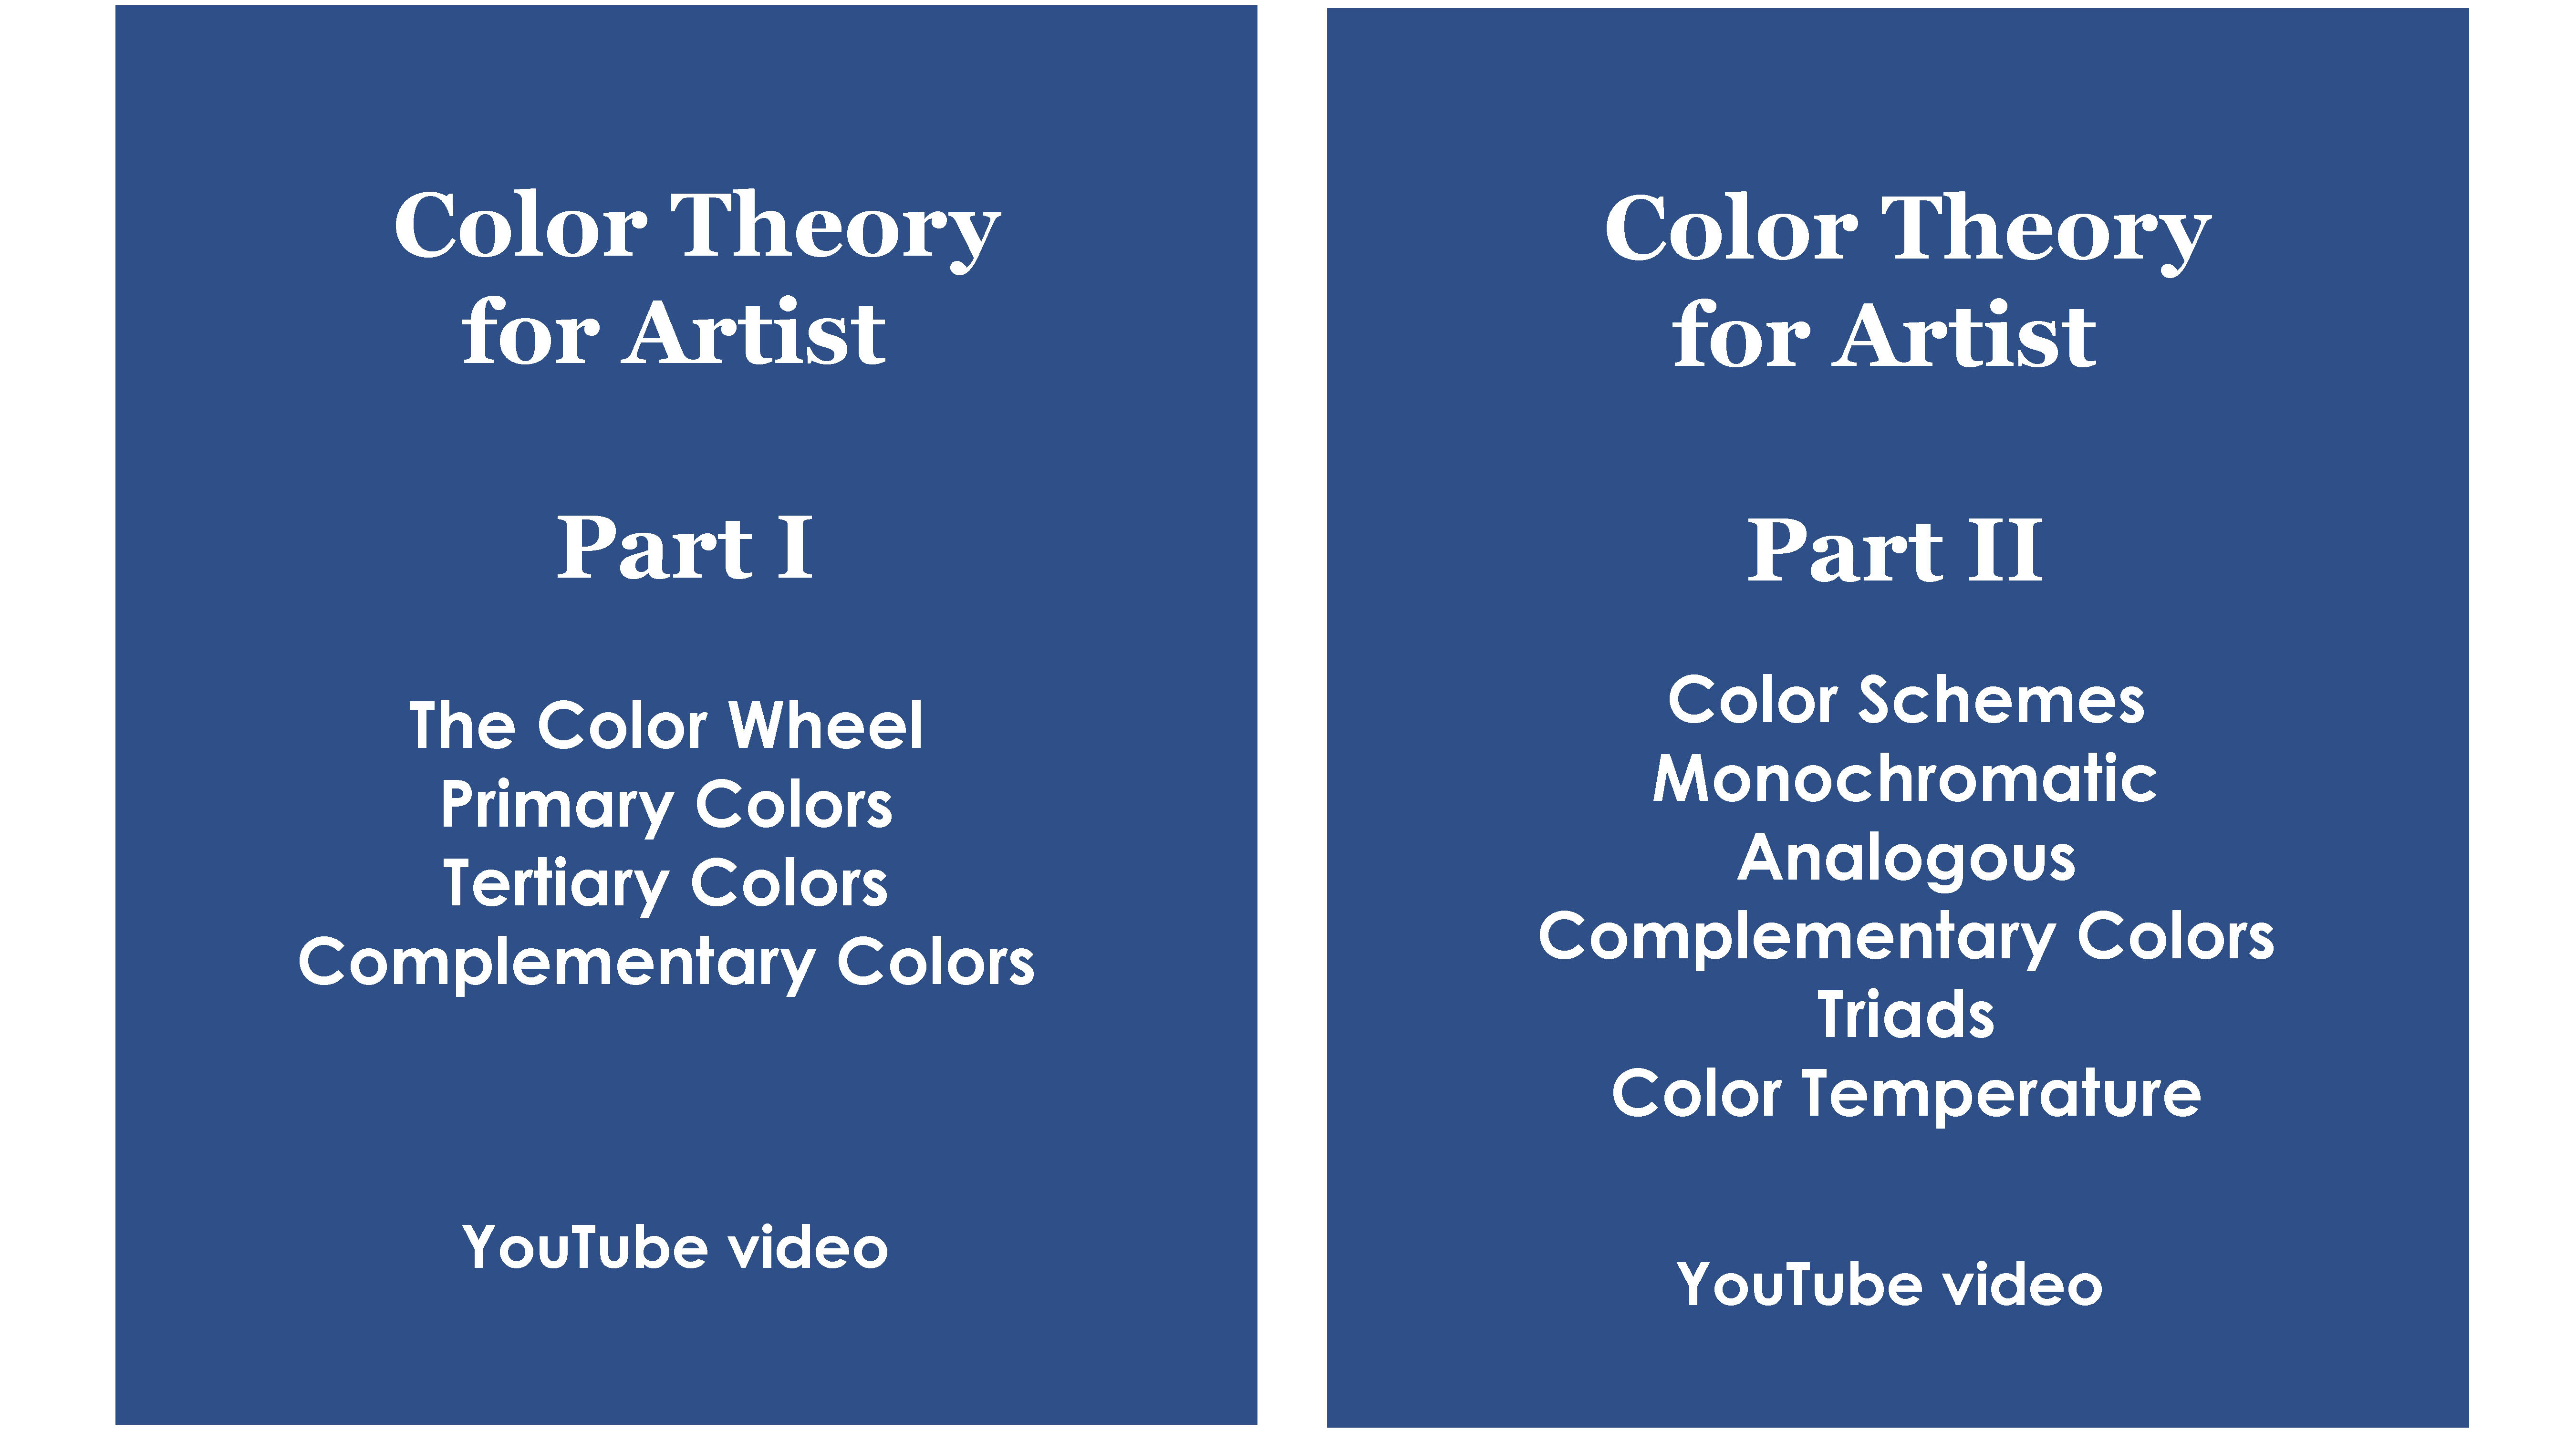 Color Theory for Artist Part I and Part II